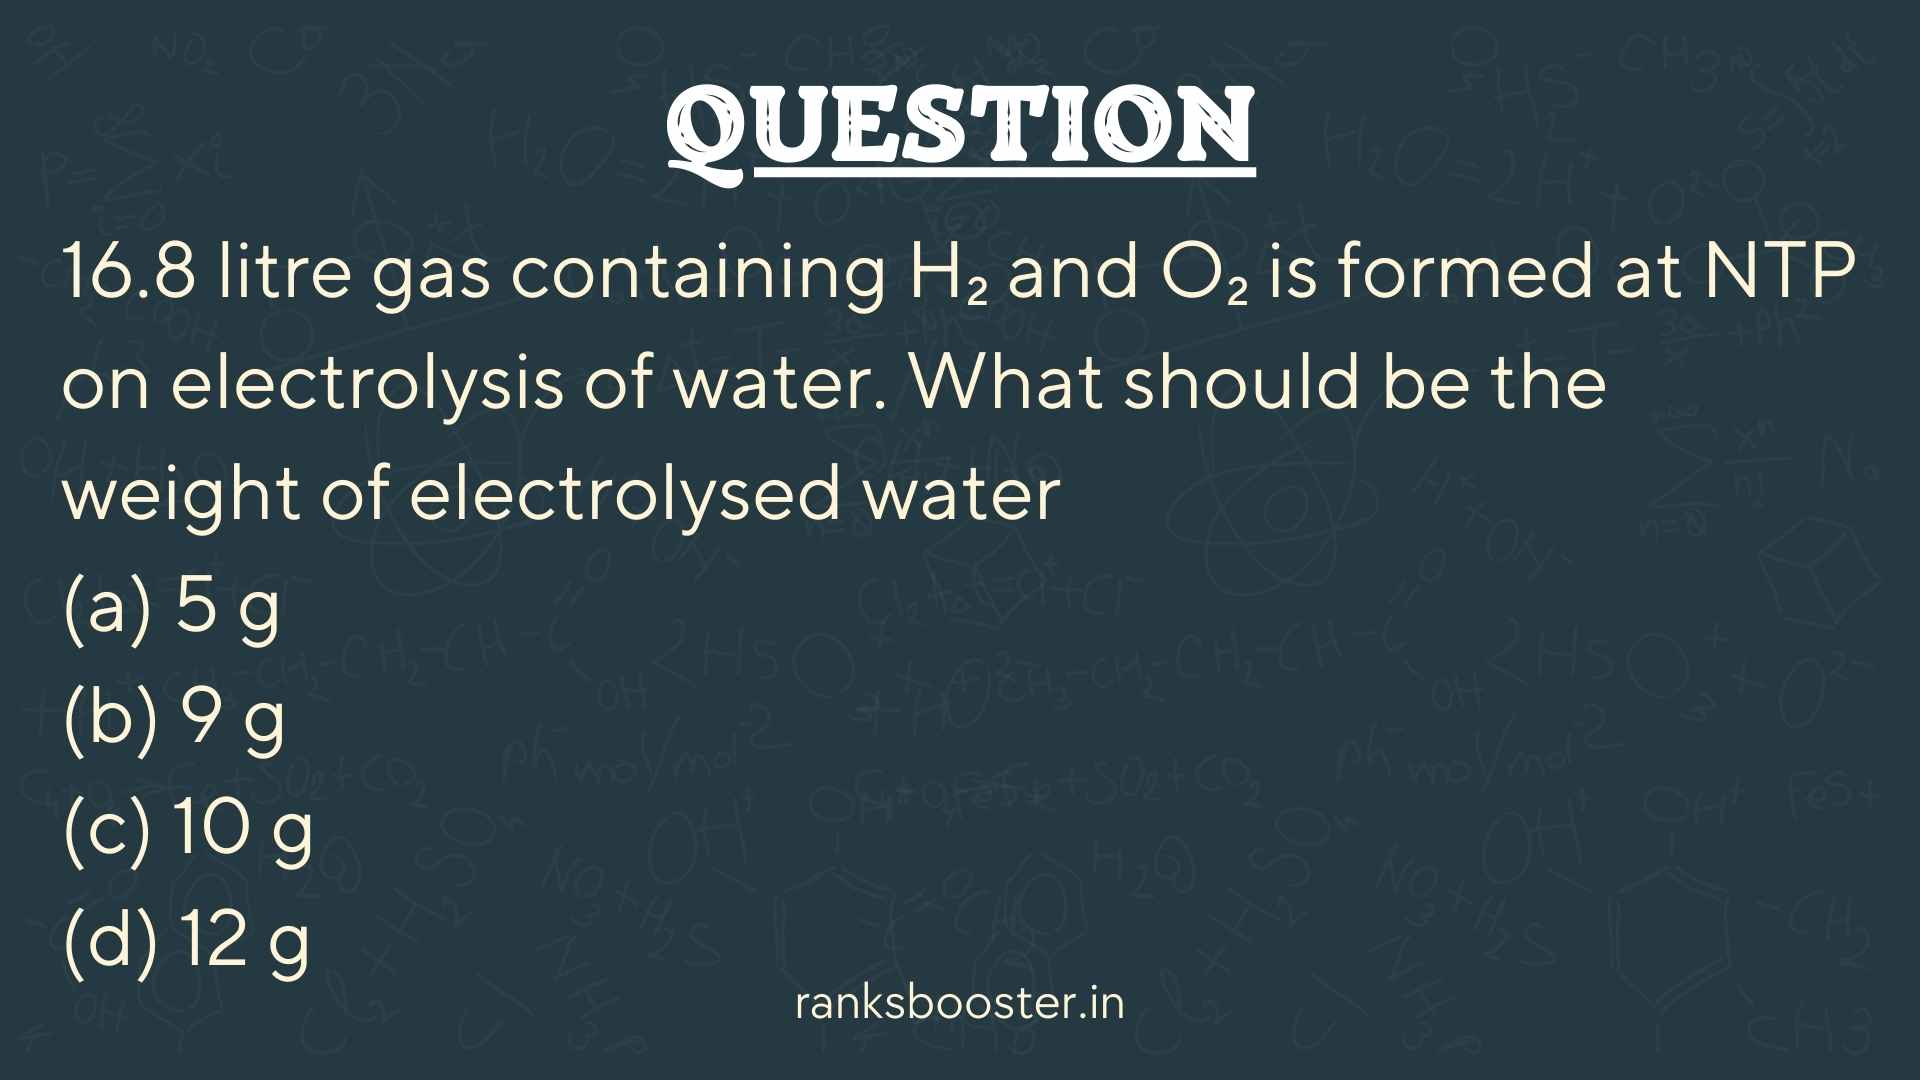 Question: 16.8 litre gas containing H₂ and O₂ is formed at NTP on electrolysis of water. What should be the weight of electrolysed water (a) 5 g (b) 9 g (c) 10 g (d) 12 g